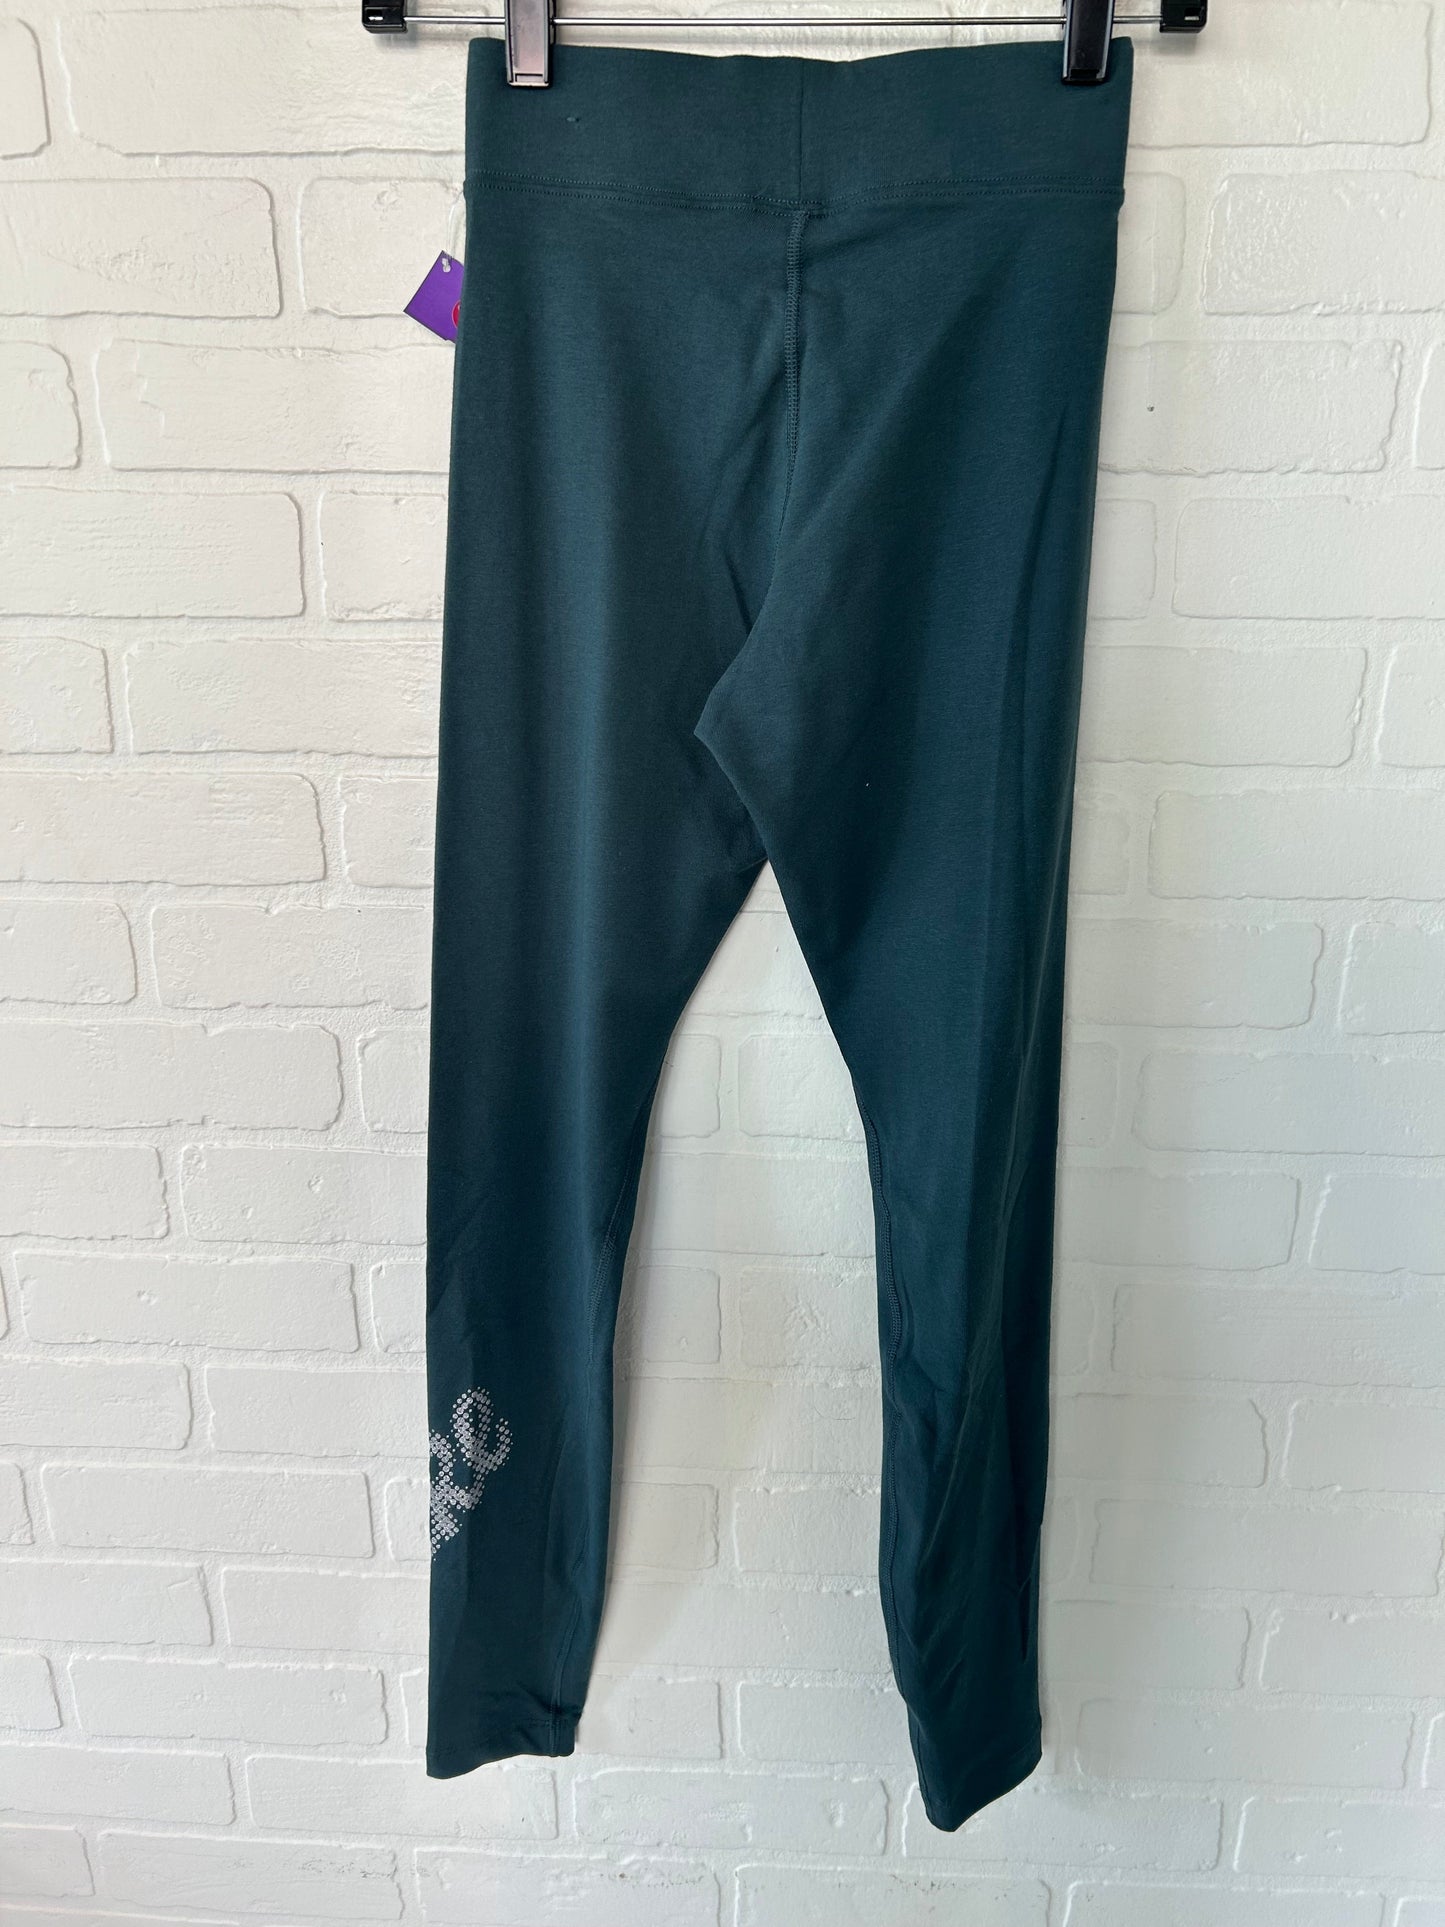 Athletic Leggings By Nike Apparel  Size: 0